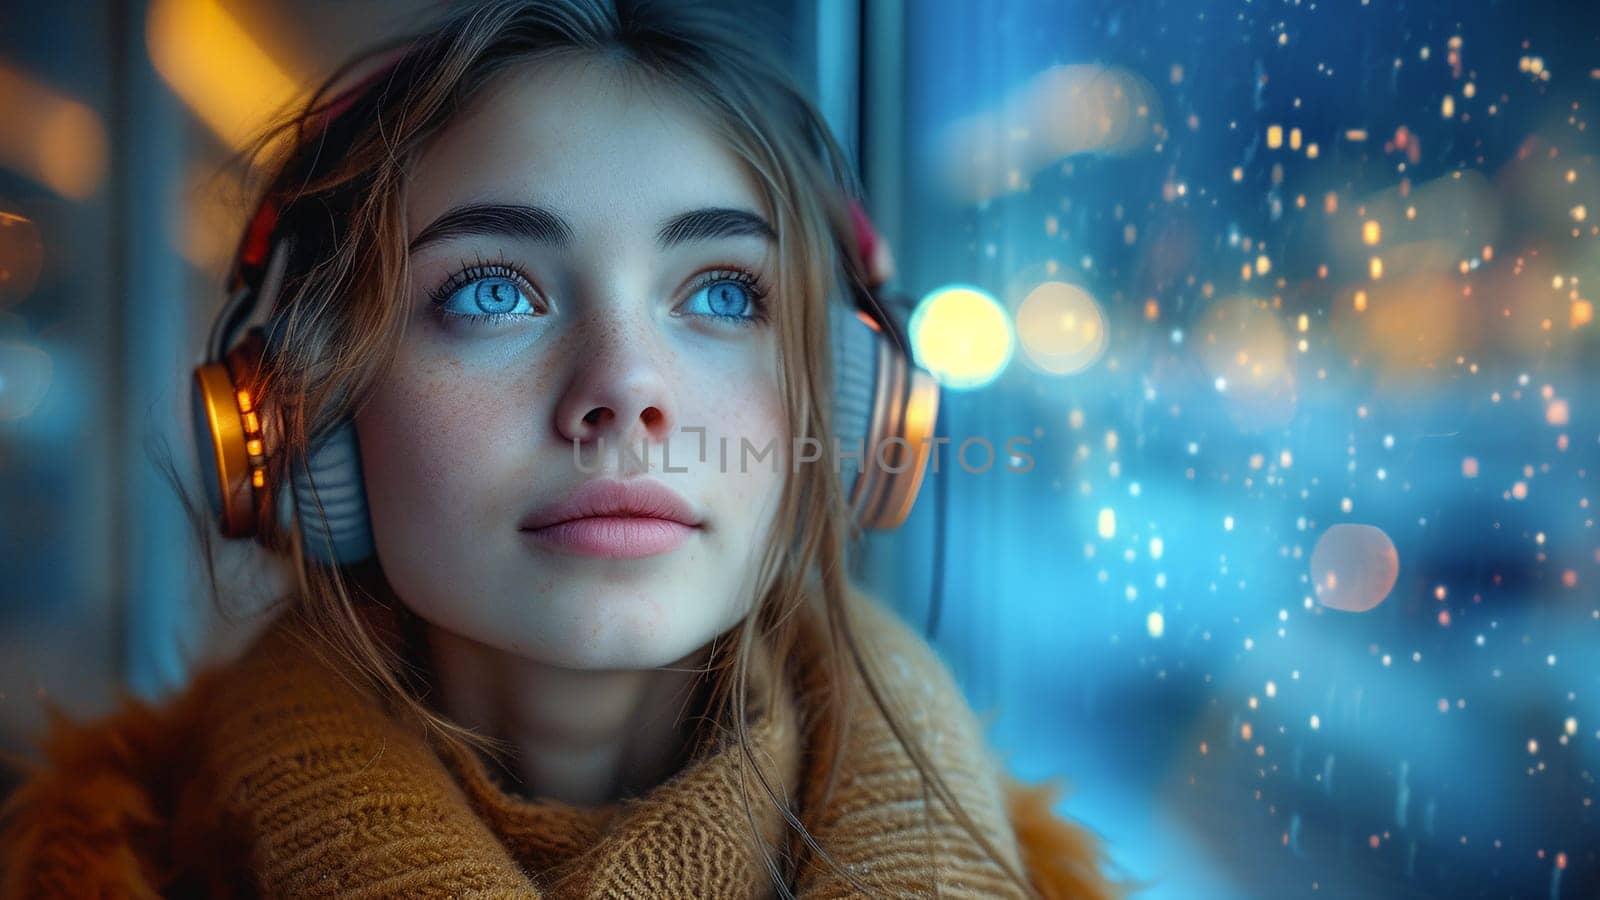 Woman Looking Out Window With Headphones On by chrisroll